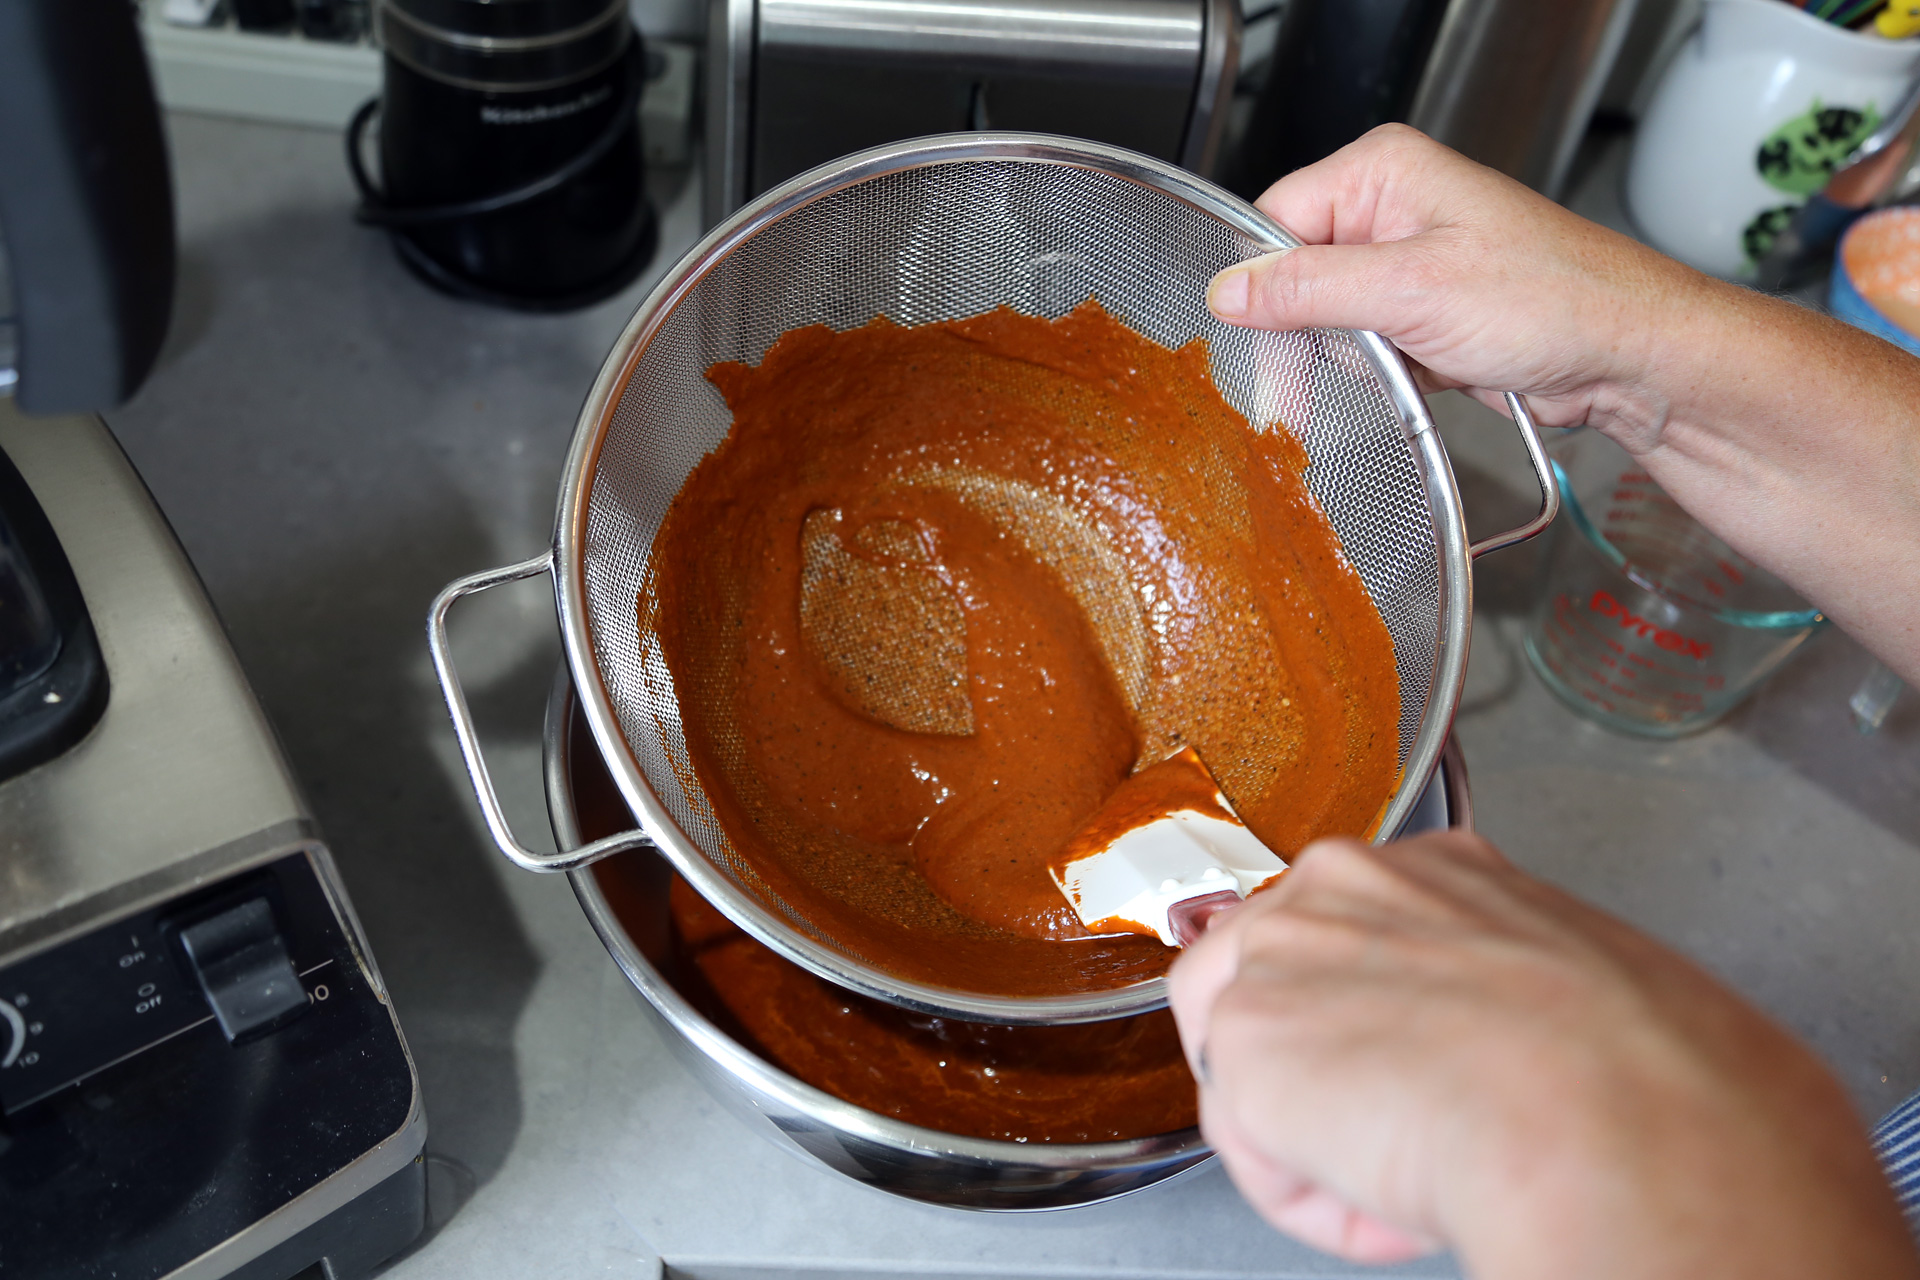 Place a fine-mesh sieve over a bowl and strain the mixture through the sieve, using a rubber spatula to press it through.